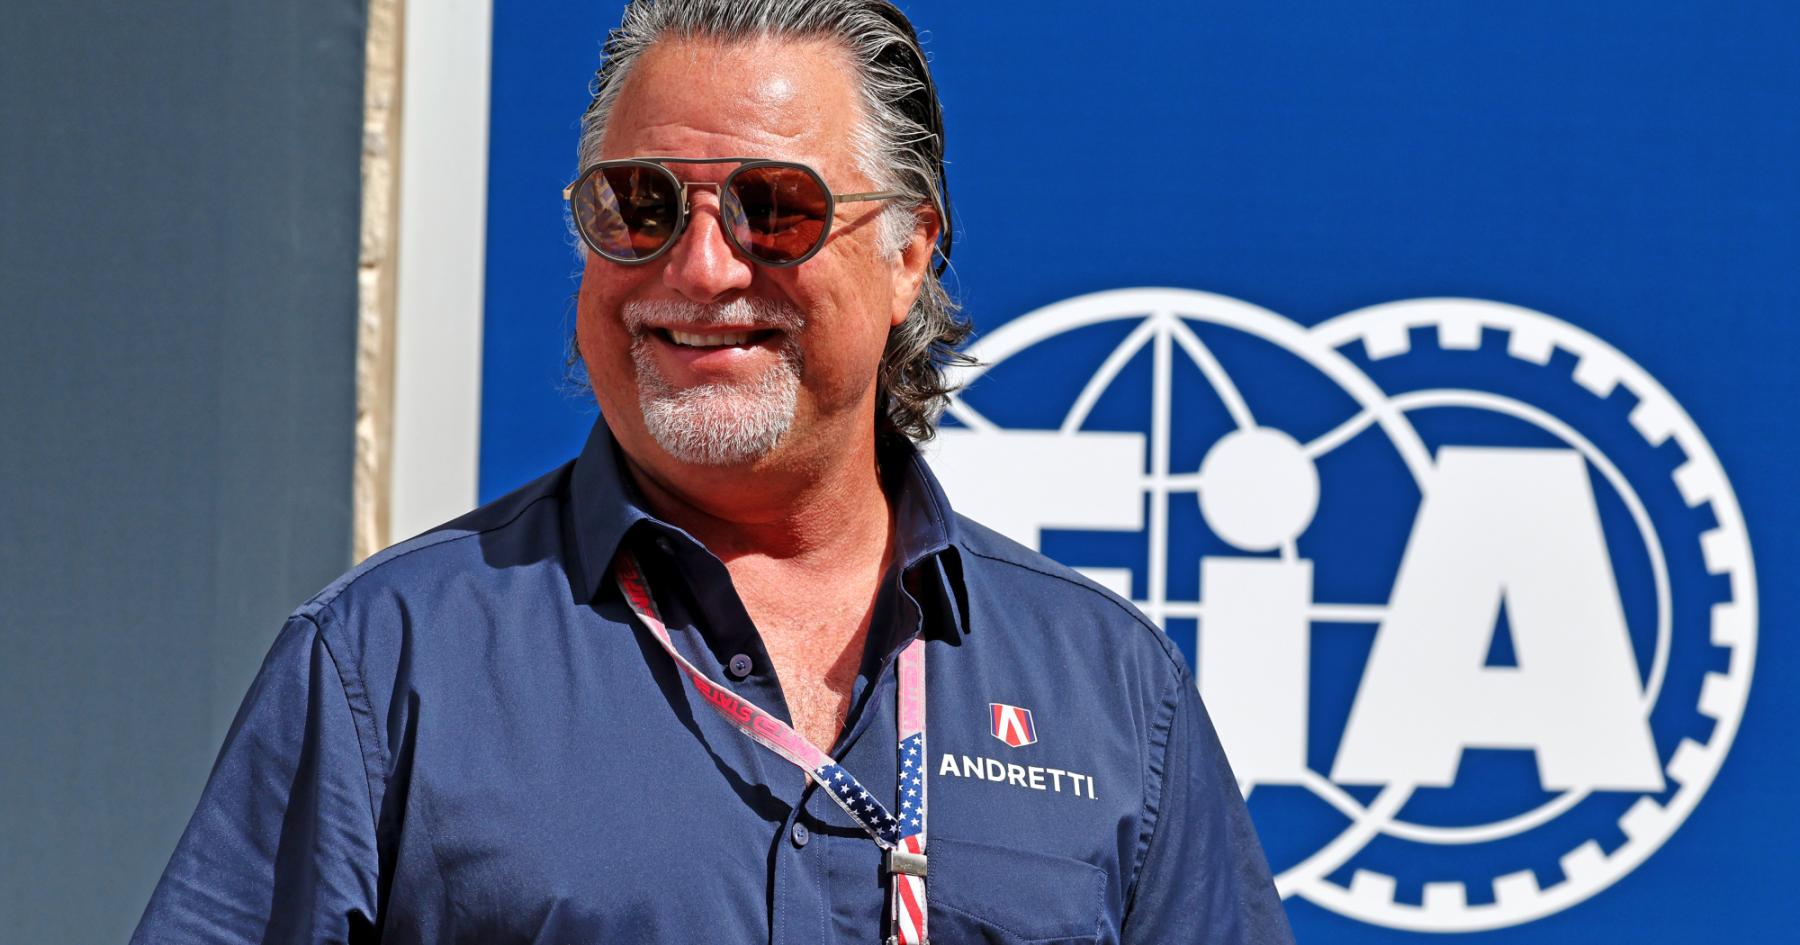 Accelerating Towards Success: Andretti's Unwavering Confidence in Creating an F1 Team